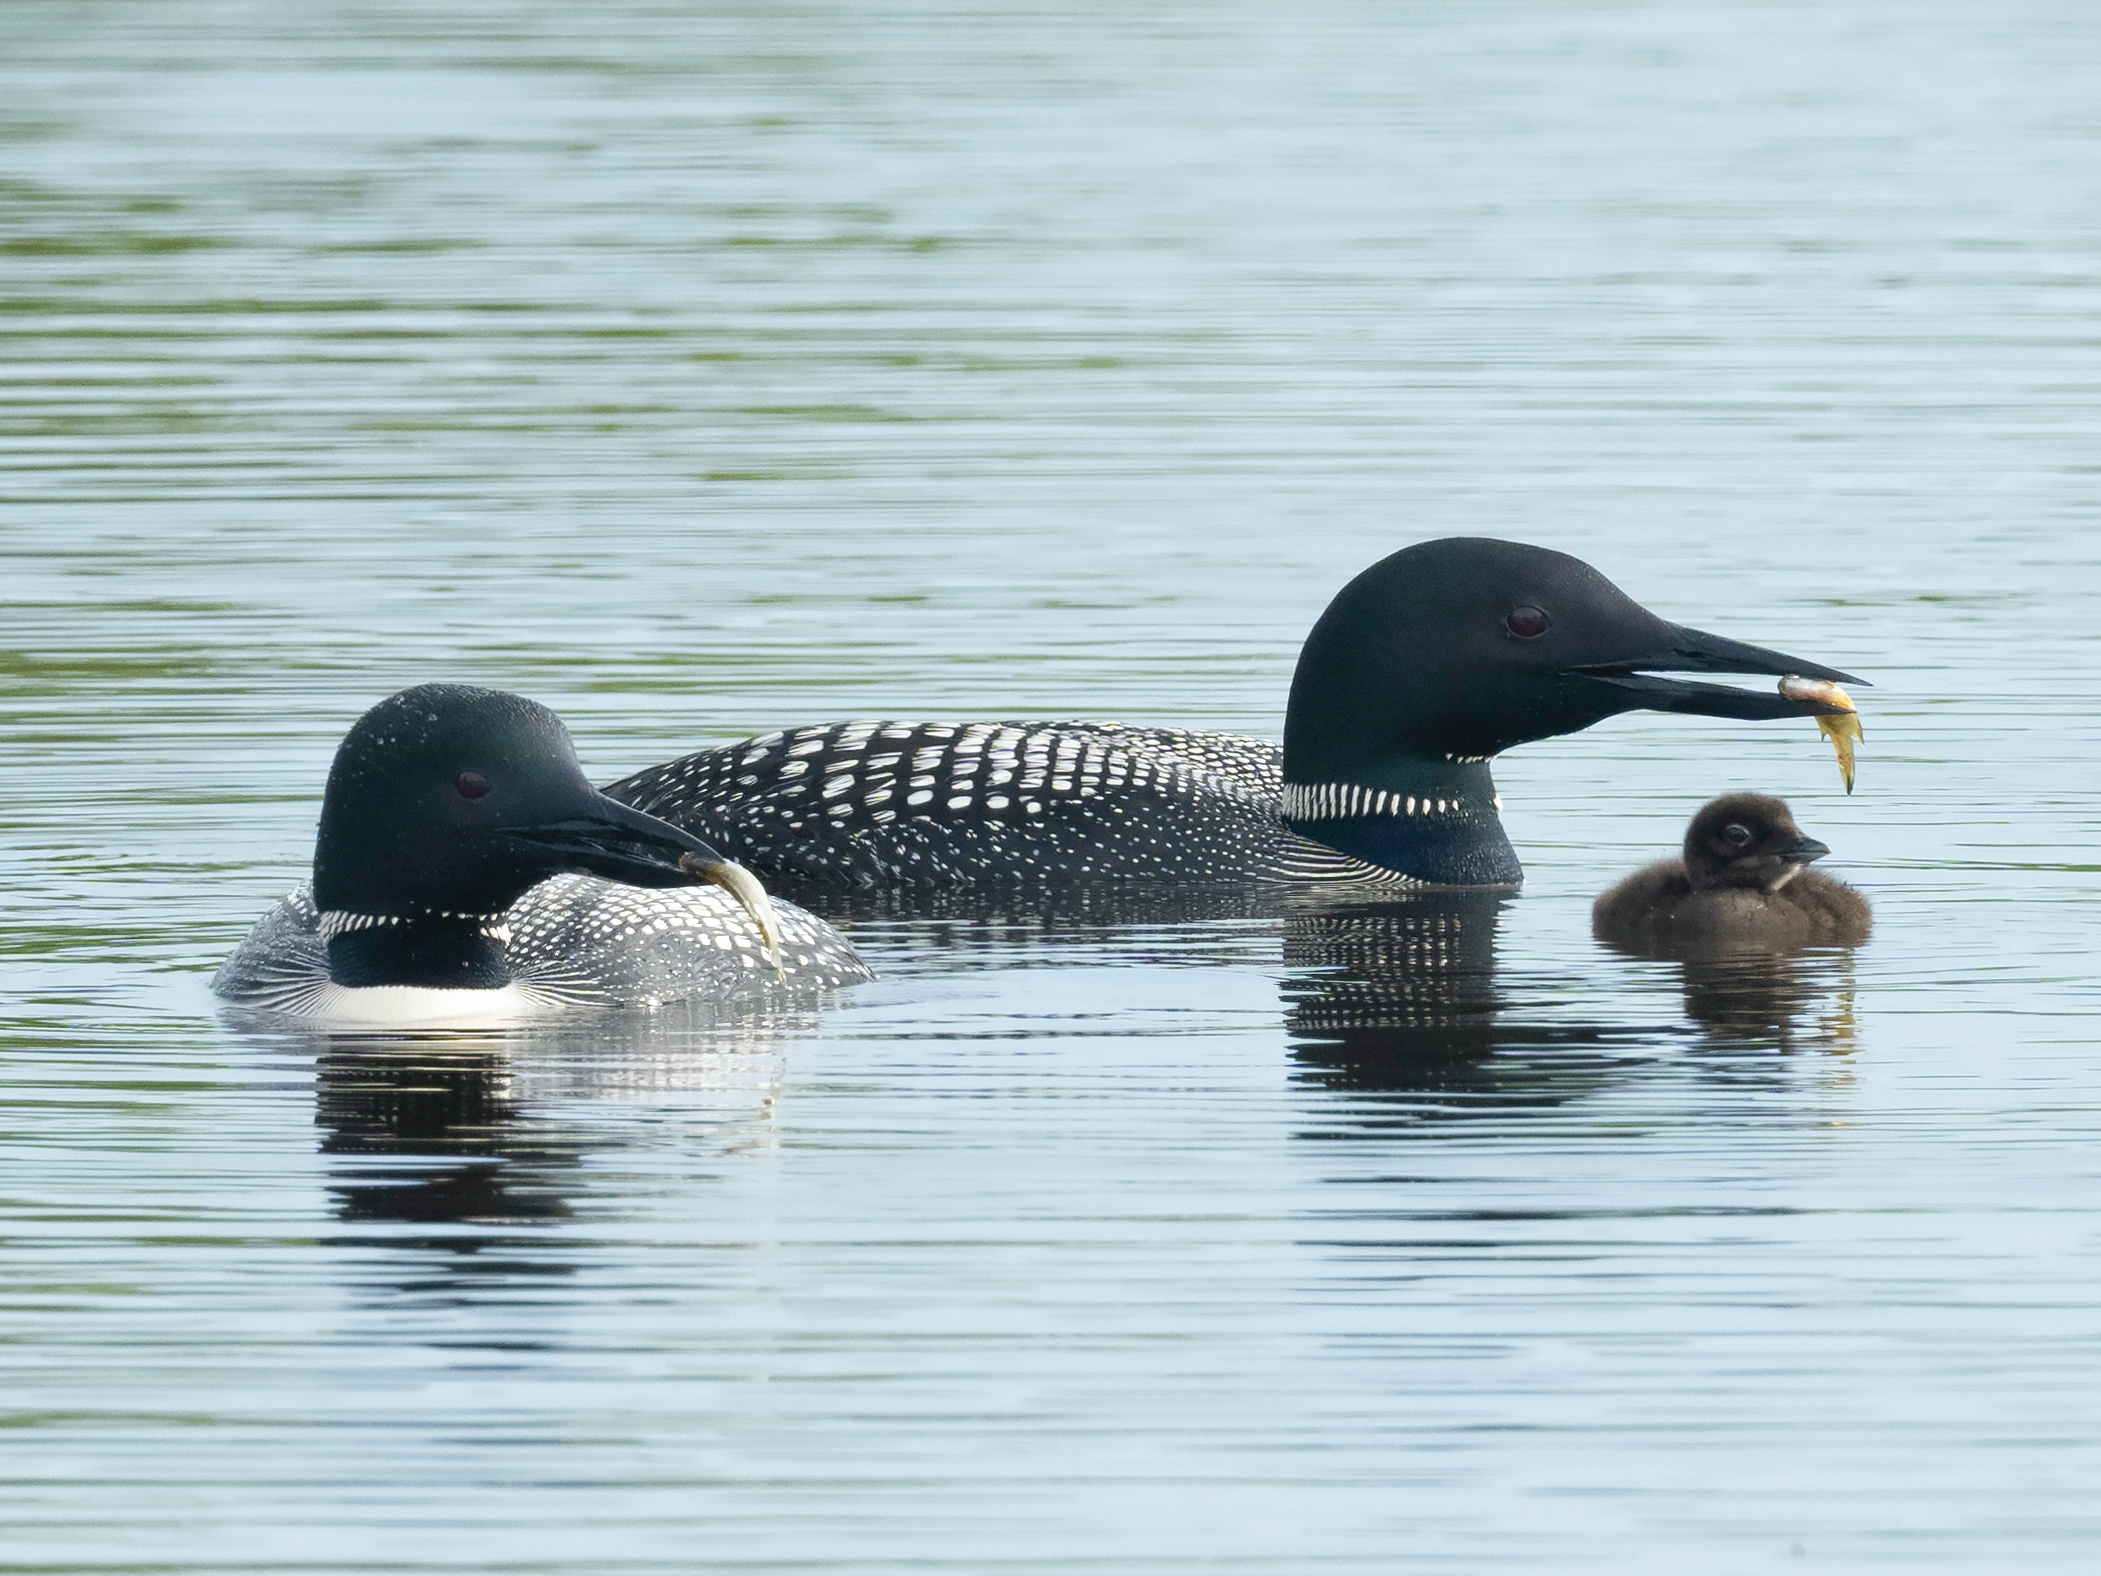 The pair of oldest known common loons offer small fish to their young